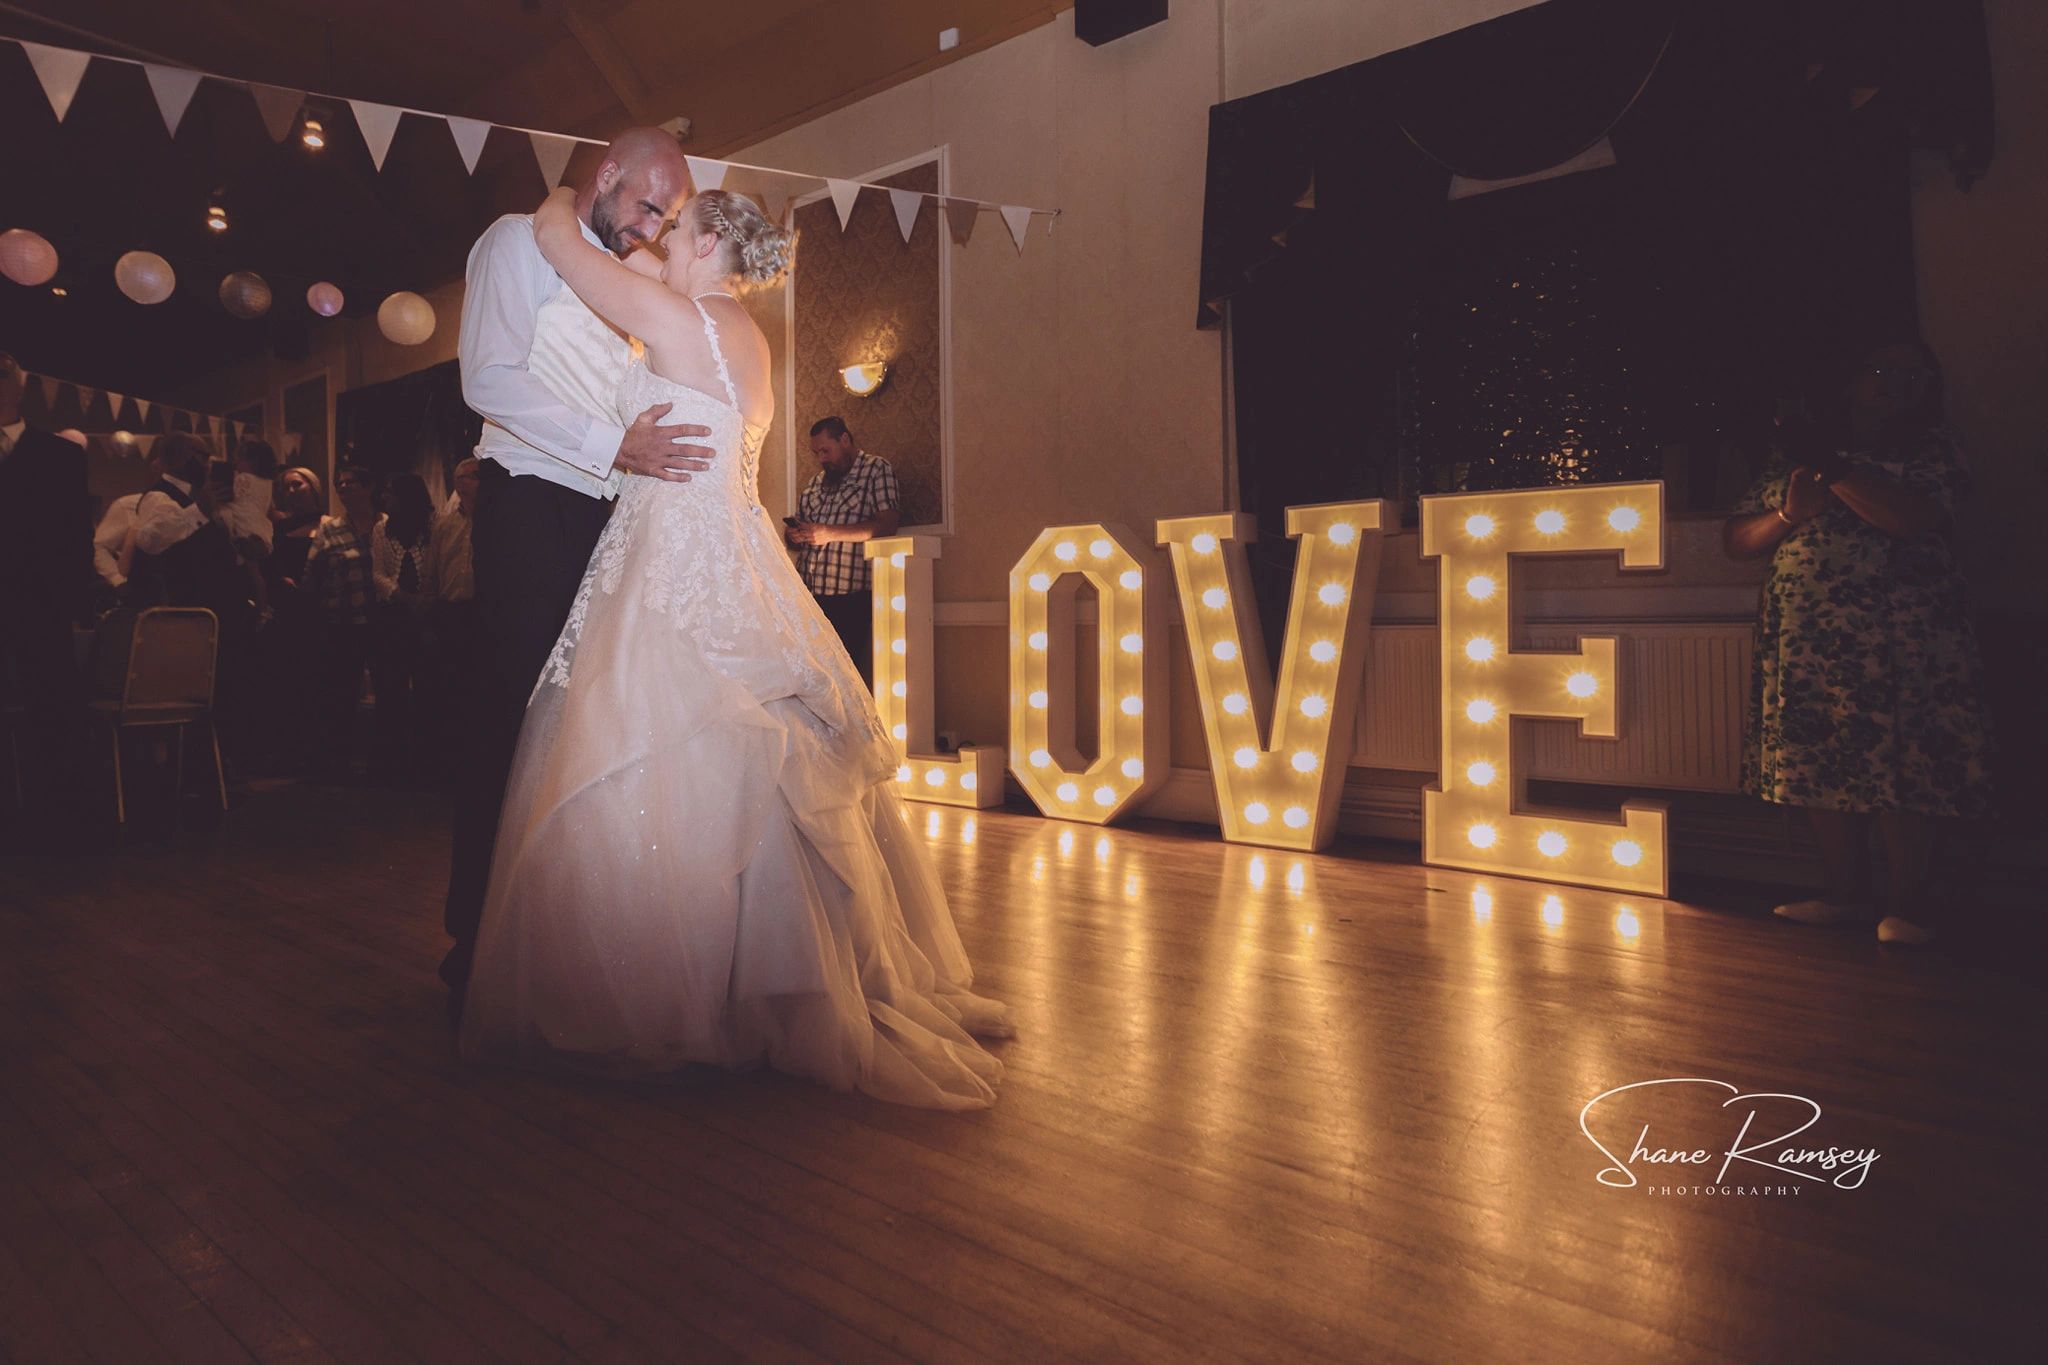 somerset wedding photographer
Love letter hire in somerset  